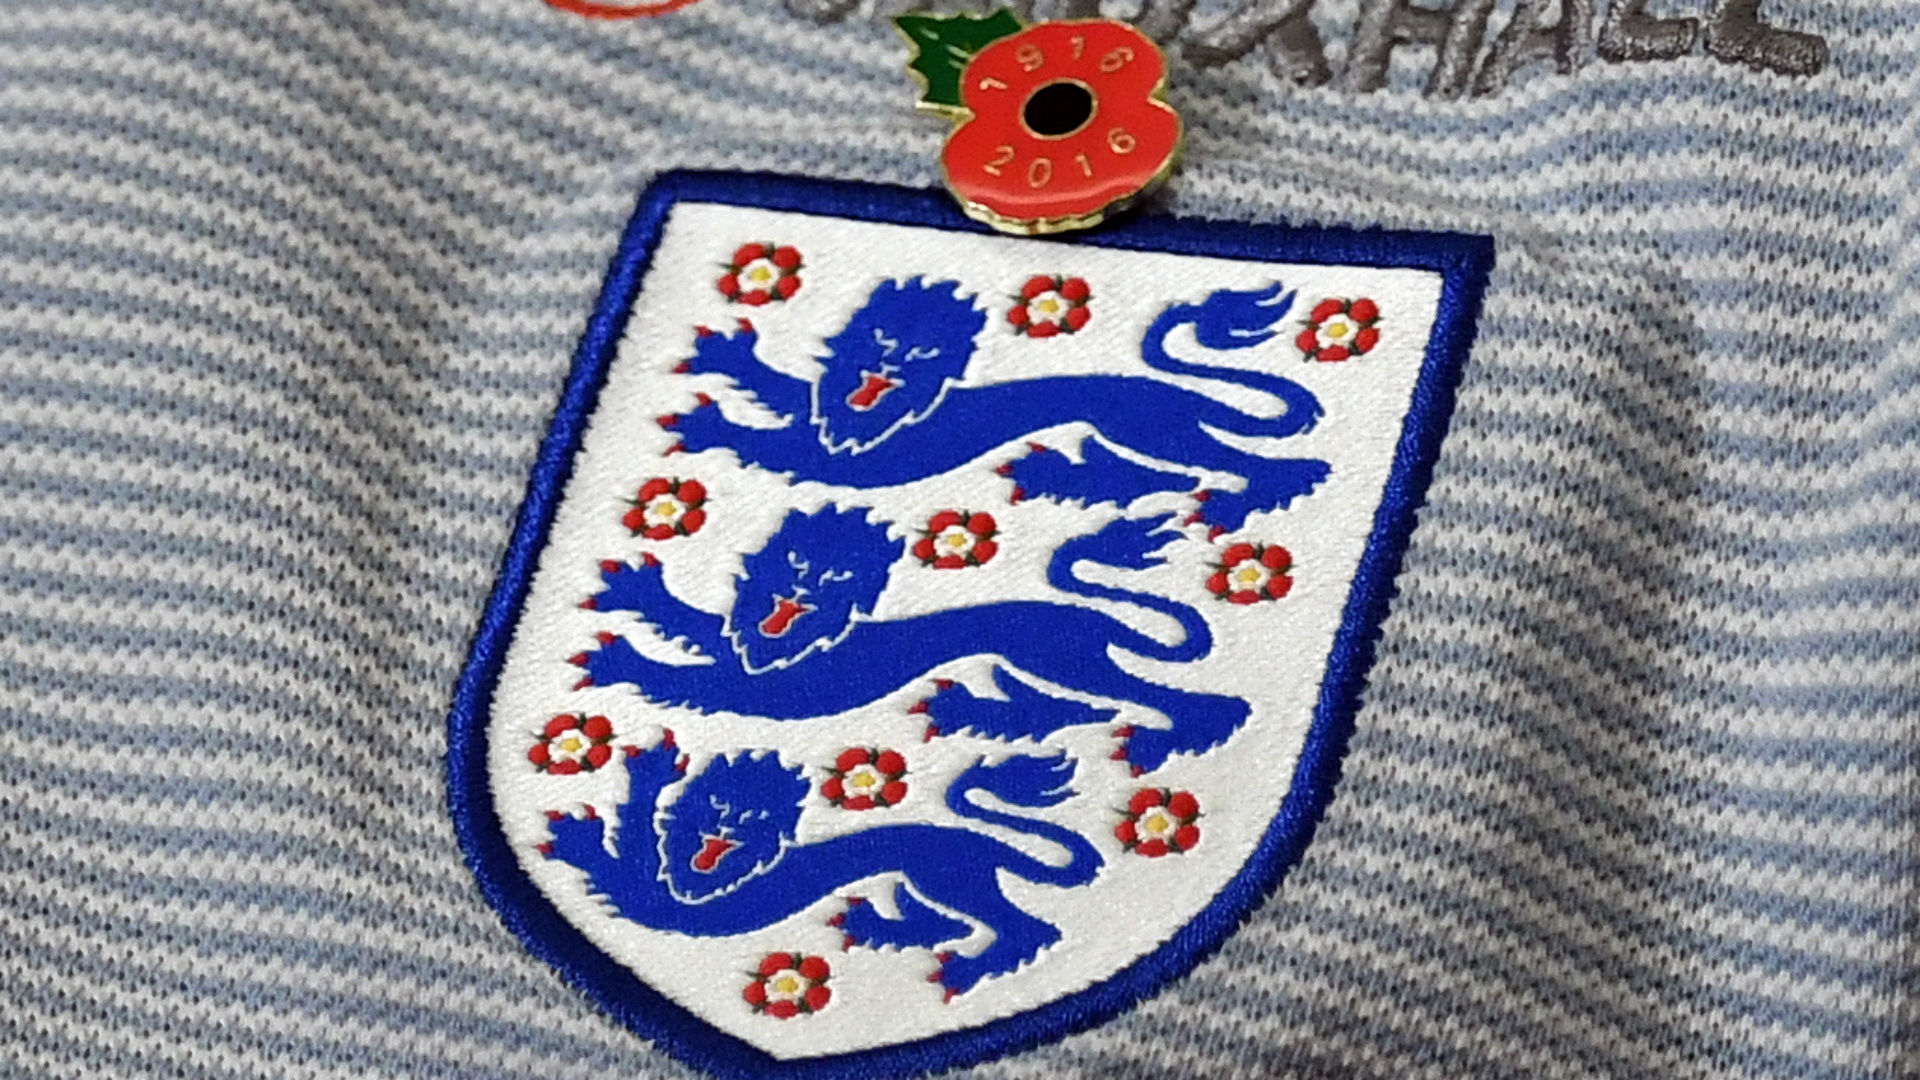 Inglaterra camisa Remembrance Day 10 11 2016